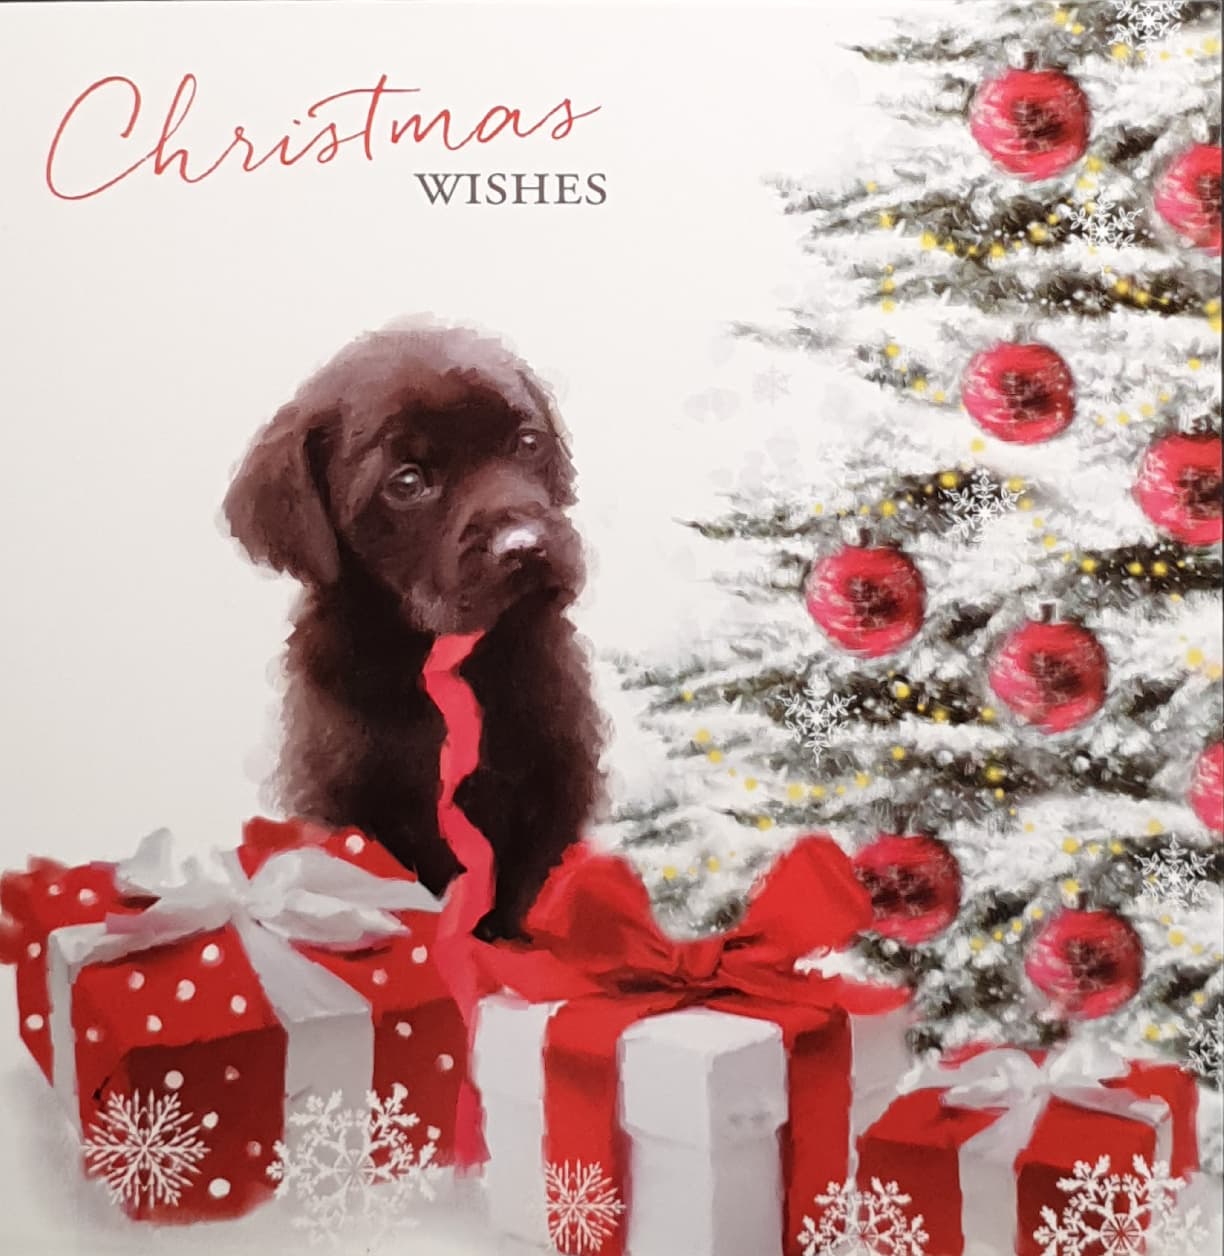 Charity Christmas Card (In Irish & English) - Pack of 8 Large Size / Cystic Fibrosis Ireland - Puppy with Gifts